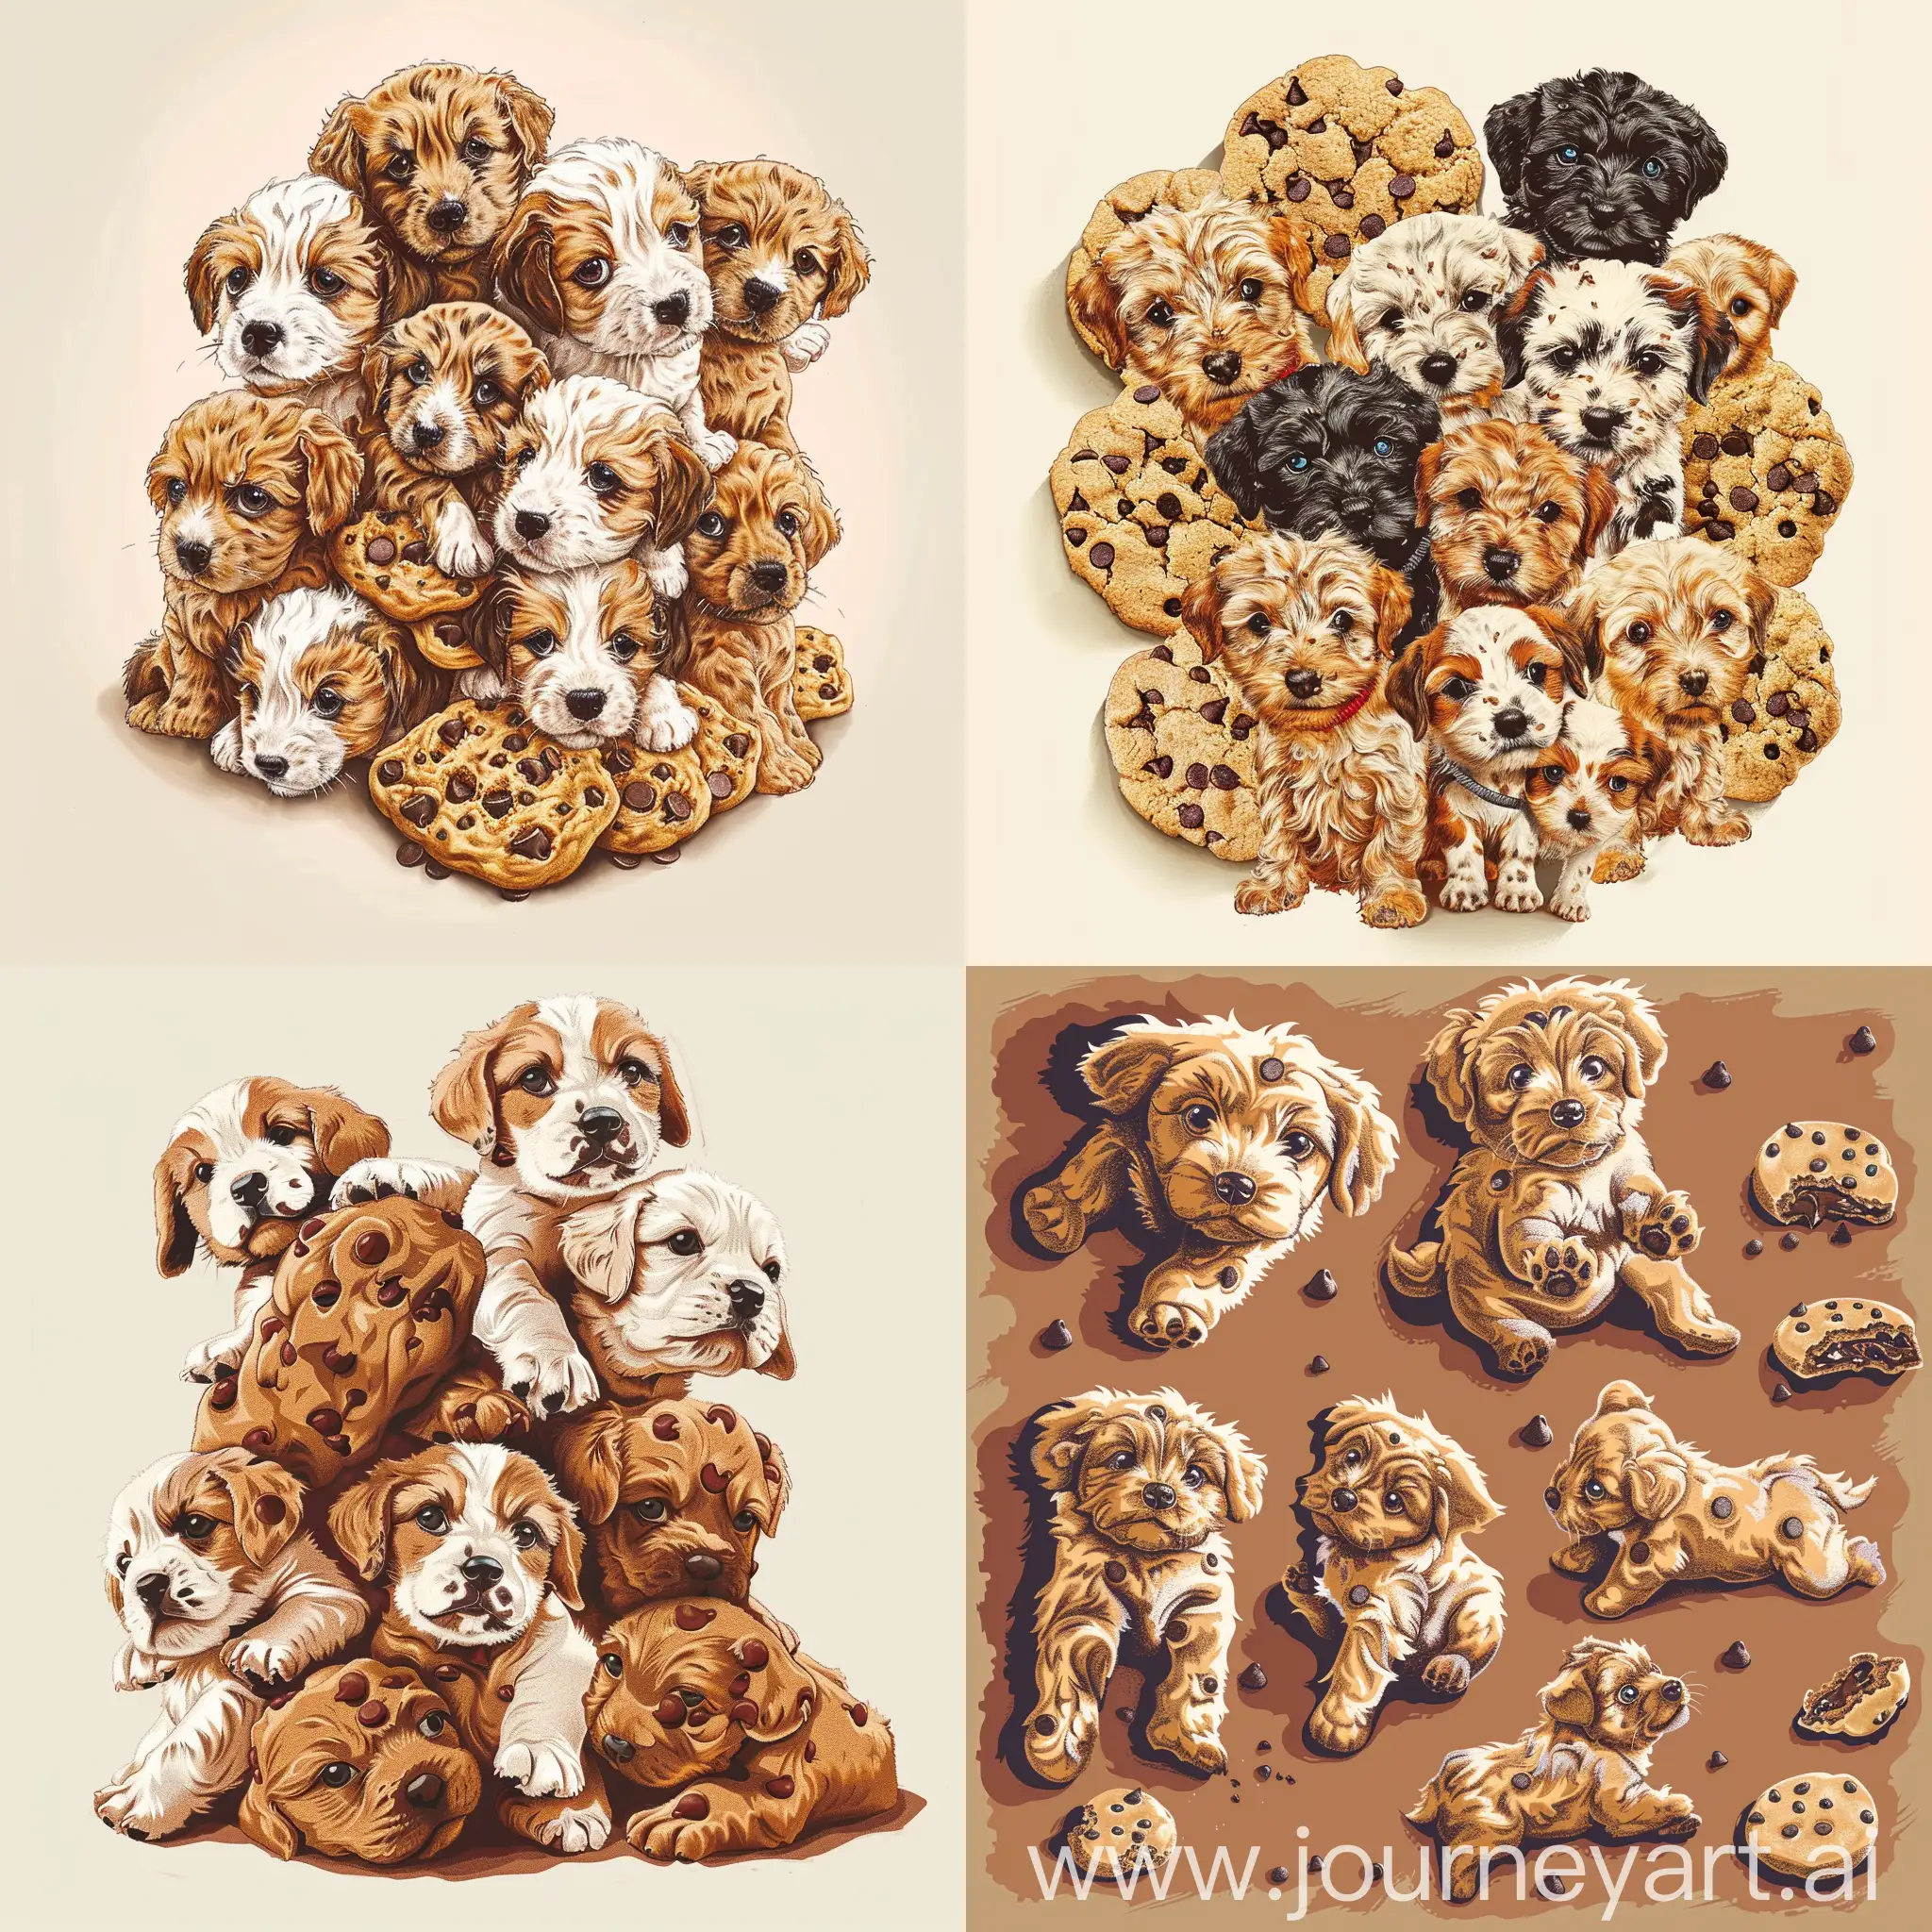 Adorable-Chocolate-Chip-Cookie-Puppies-Sweet-and-Detailed-Digital-Drawing